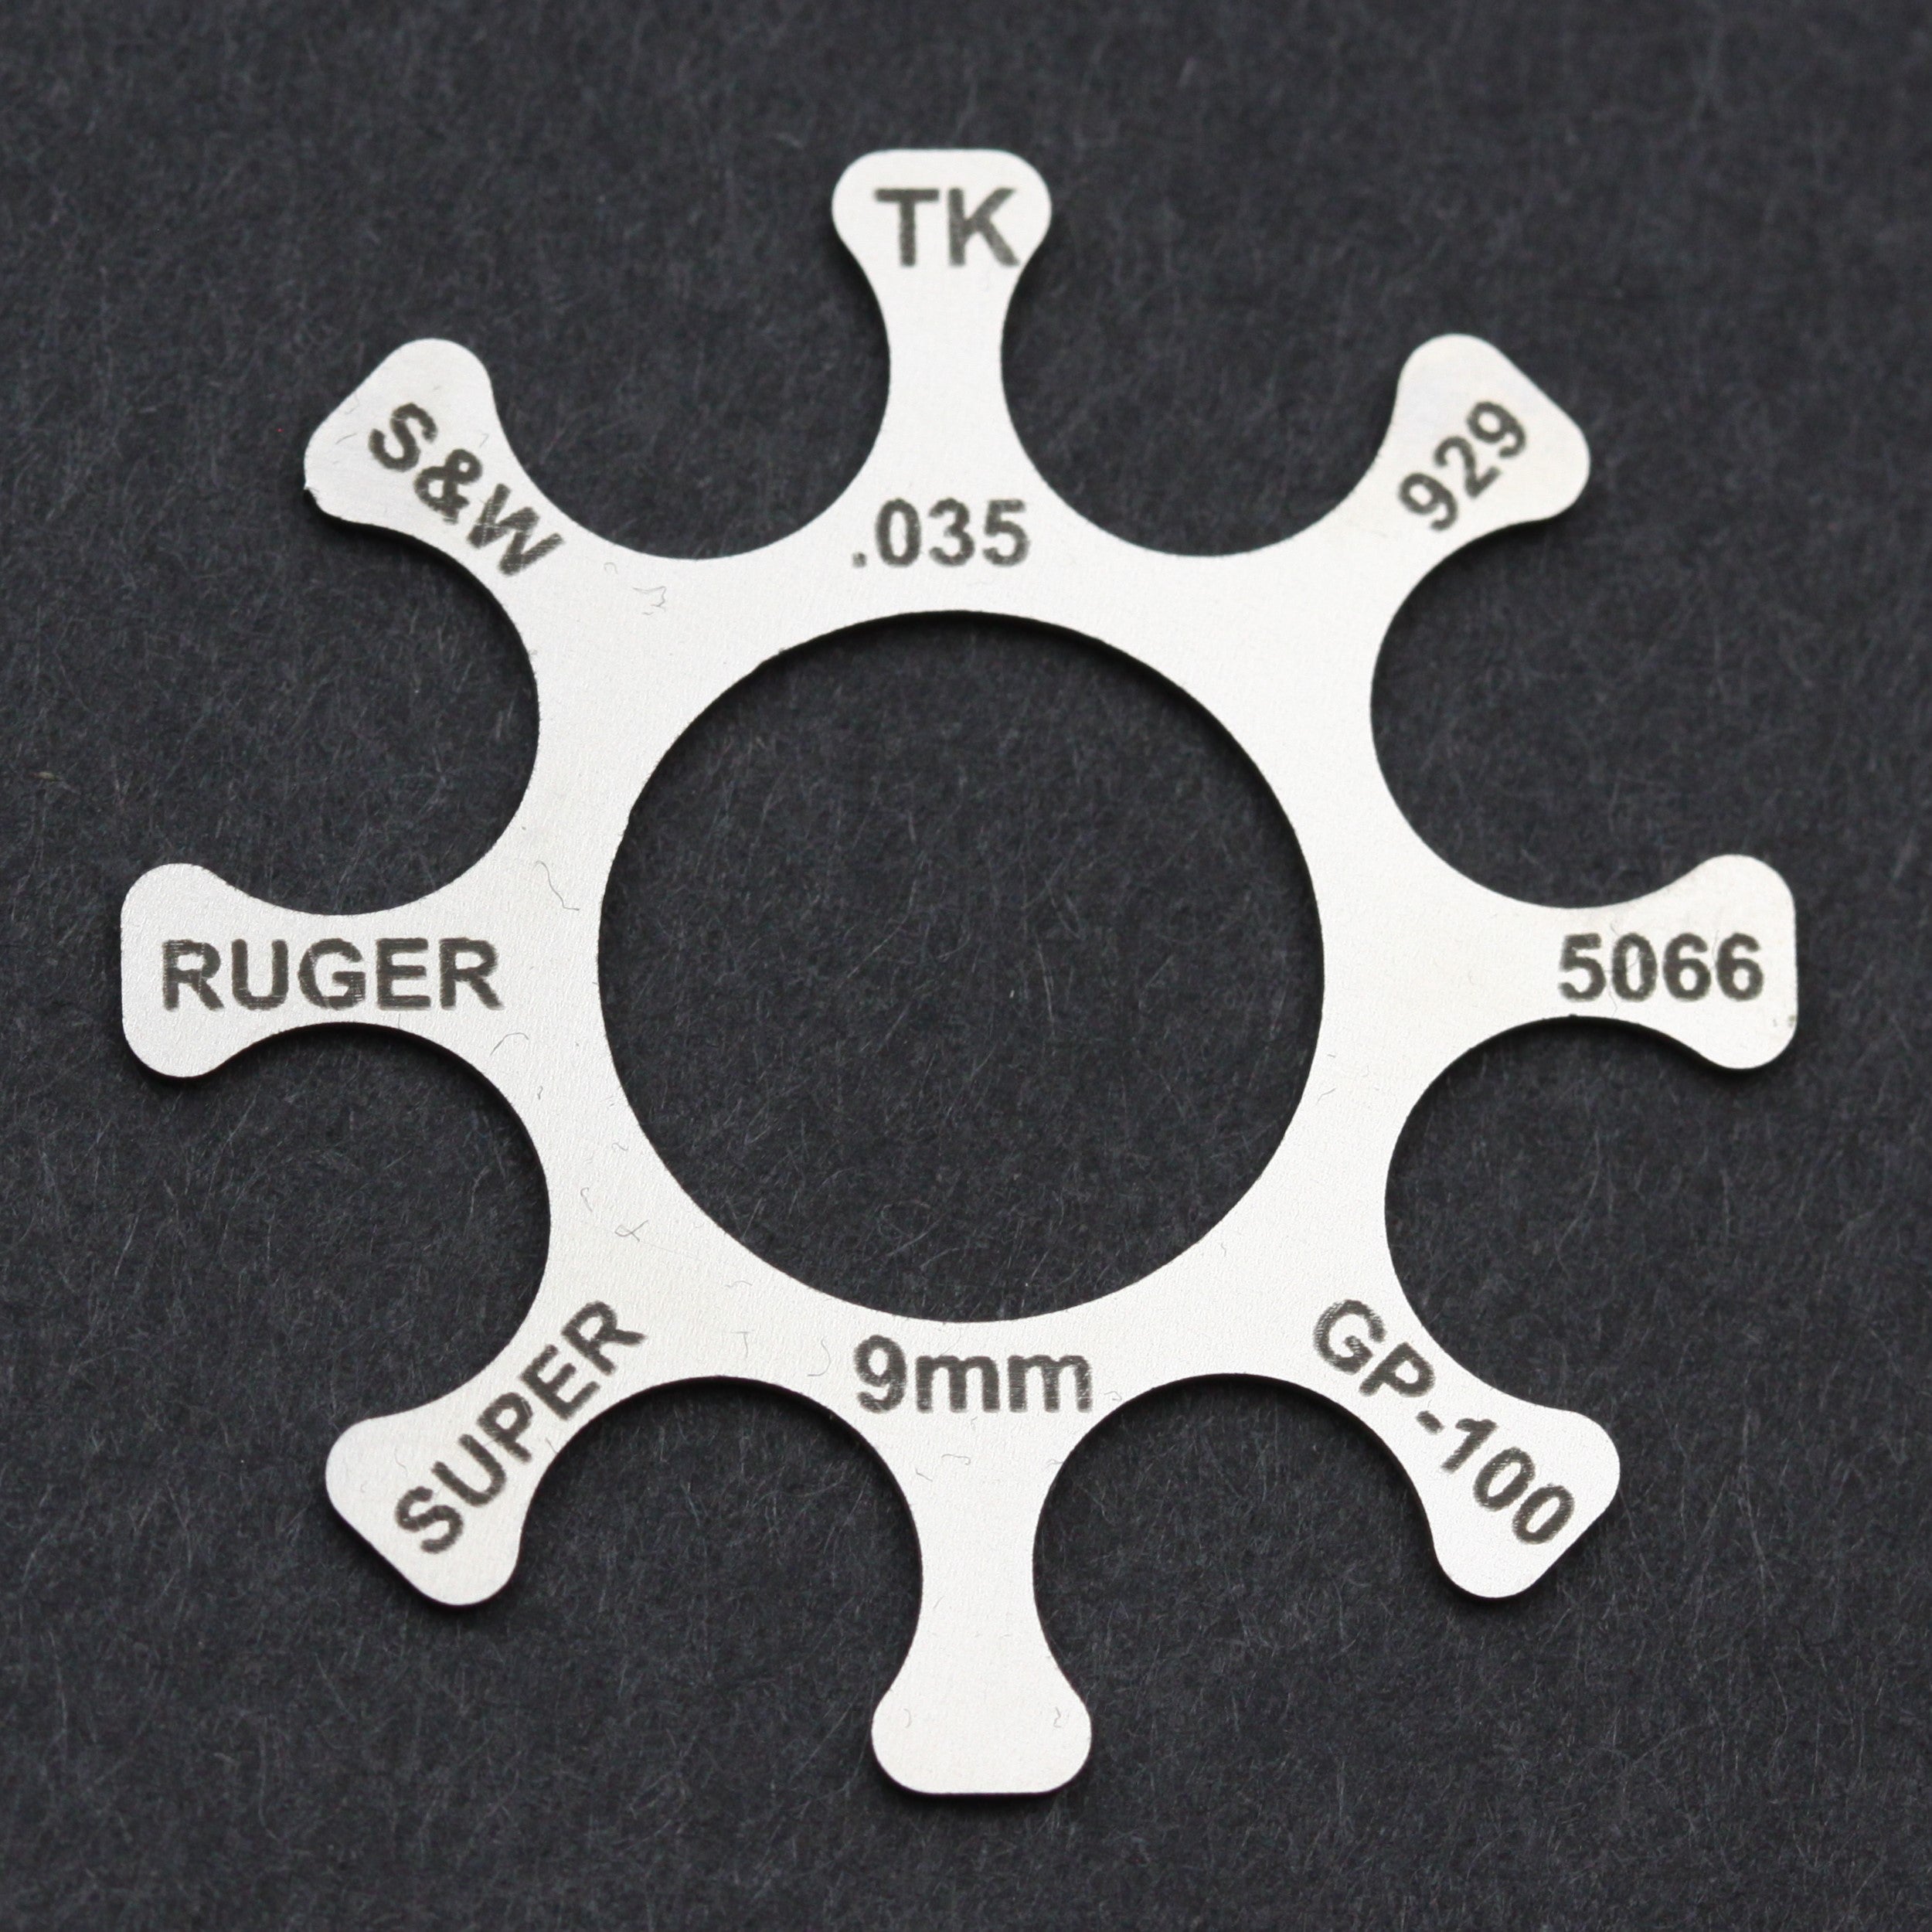 Ruger Super GP-100 9mm Moon Clips .035 S/S